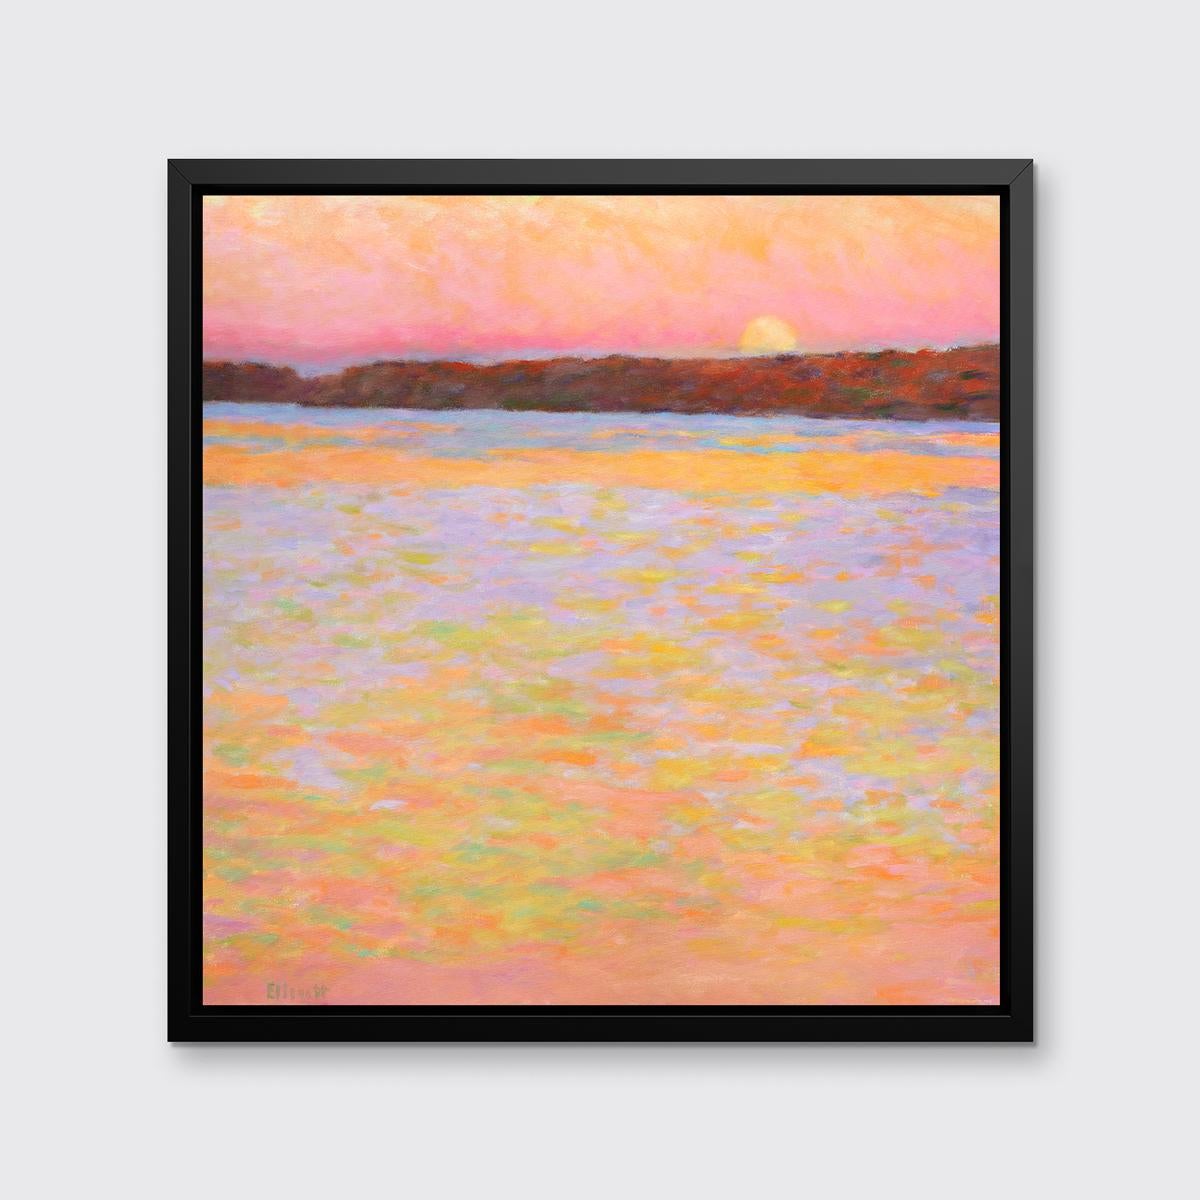 This abstract landscape limited edition print by Ken Elliott features a warm, vibrant palette and captures a landscape with the sun just along the horizon. The painting has an impressionistic style, with green, orange, blue, and pink layered